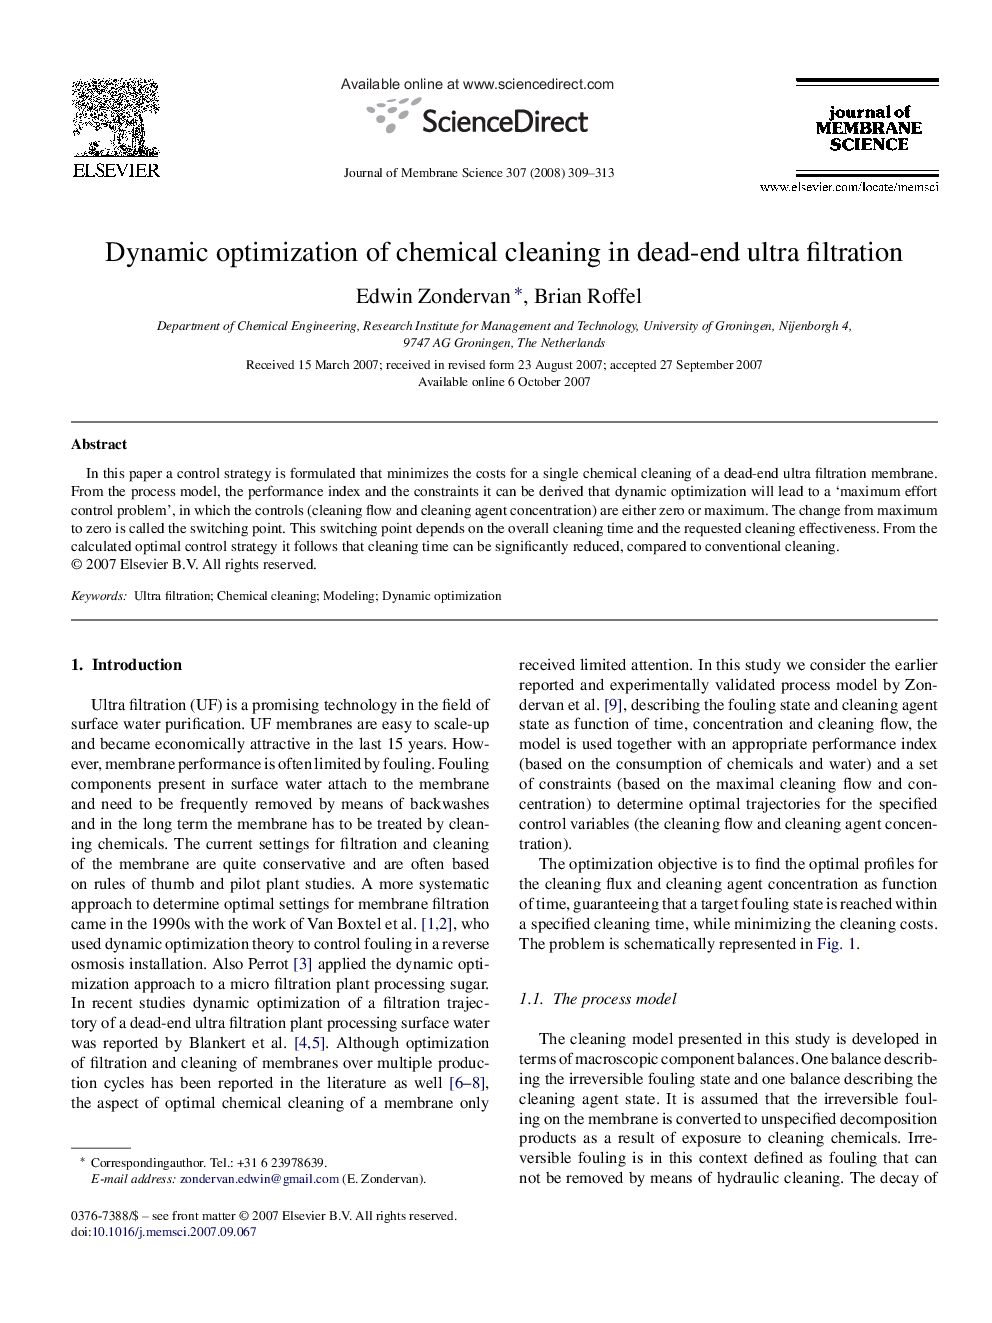 Dynamic optimization of chemical cleaning in dead-end ultra filtration